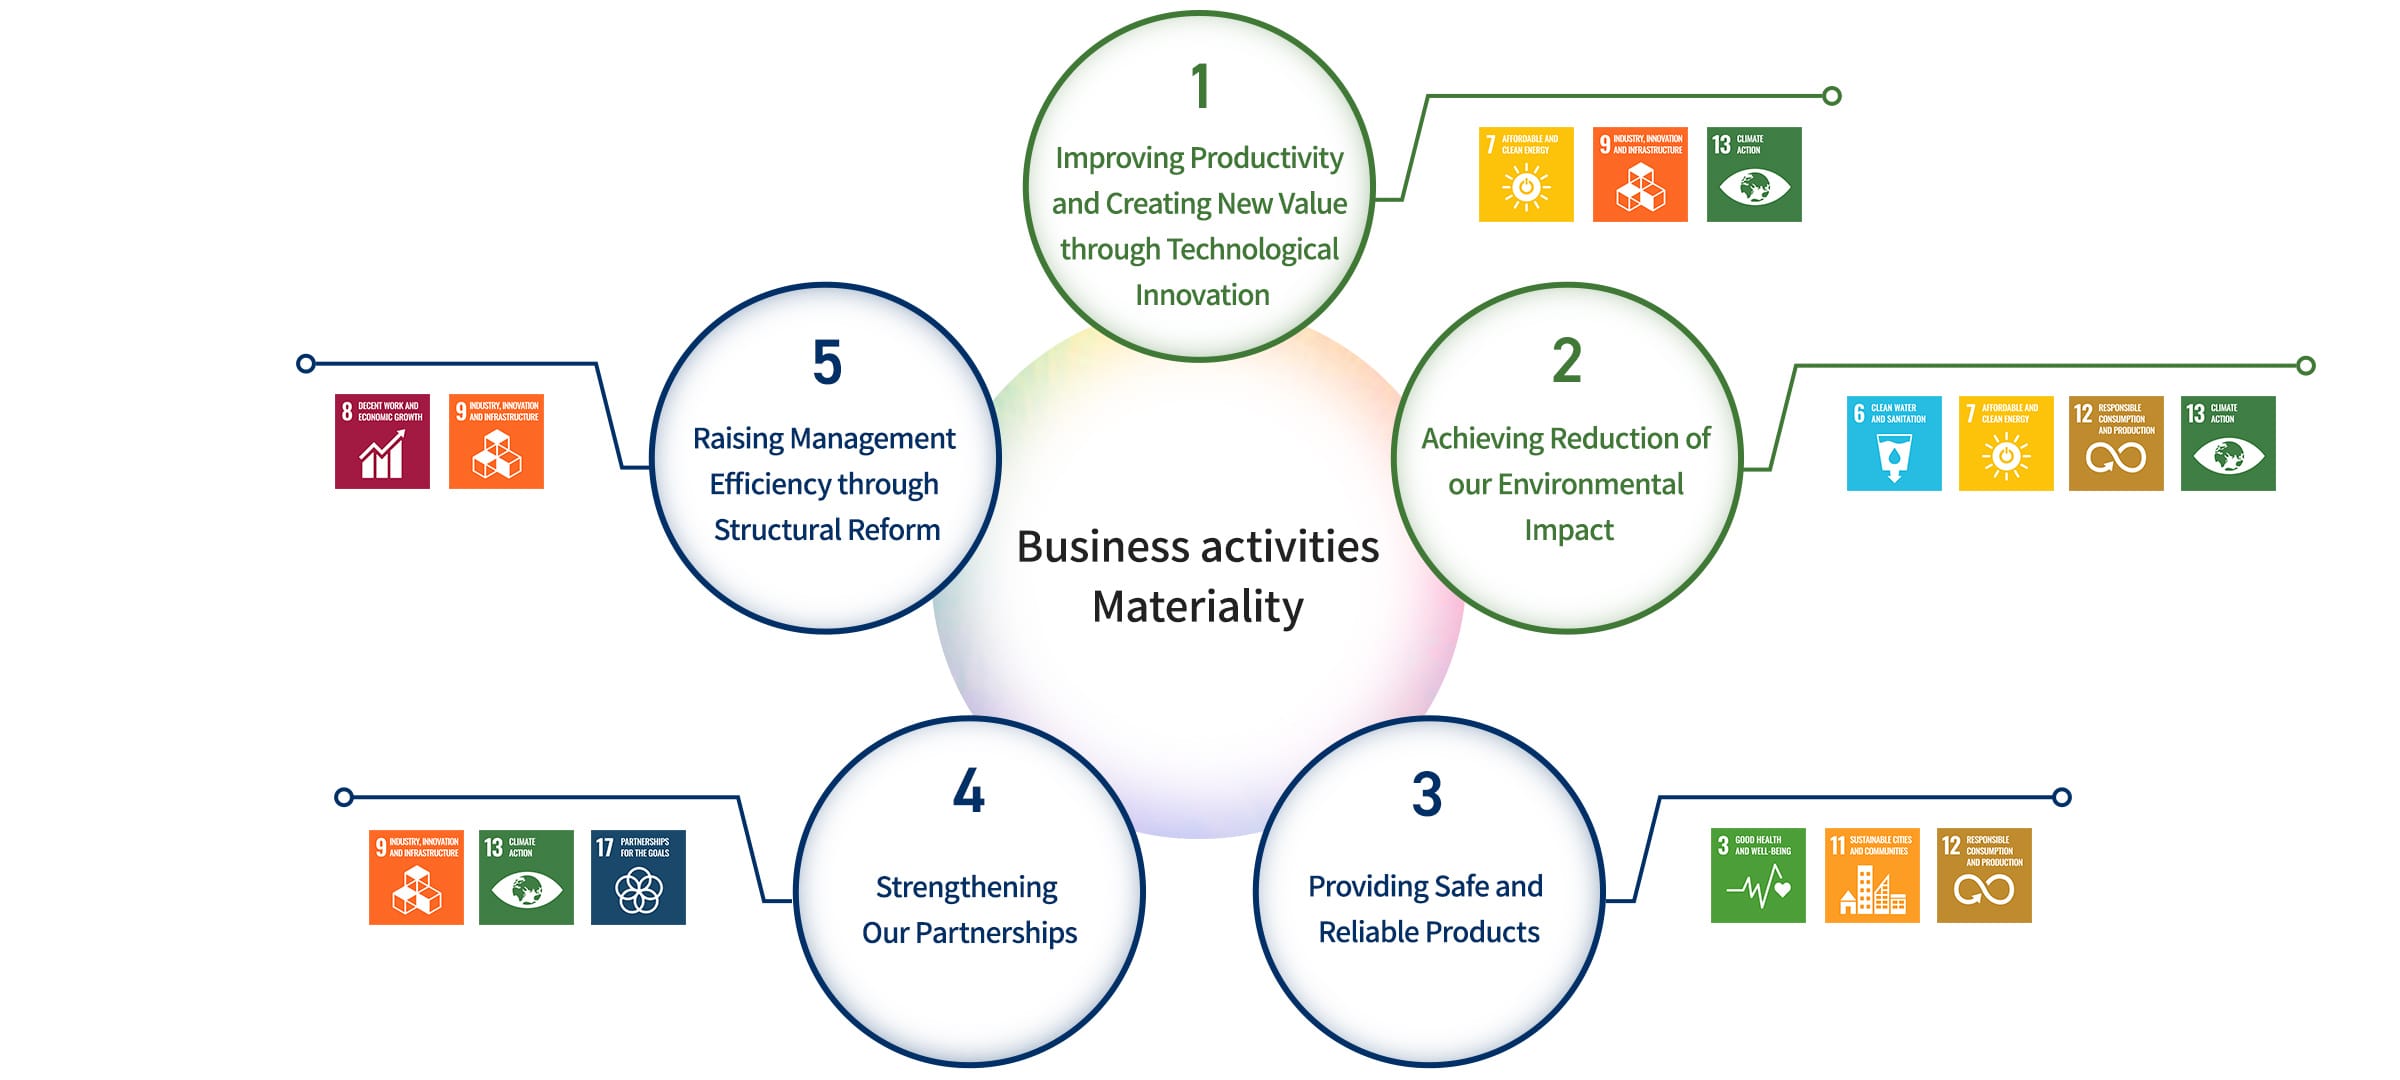 5 key tasks related to our business activities. 1.Improving Productivity and Creating New Value through Technological Innovation (SDGs 7:AFFORDABLE AND CLEAN ENERGY, 9:INDUSTRY, INNOVATION AND INFRASTRUCTURE, 13:CLIMATE ACTION), 2.Achieving Reduction of our Environmental Impact (SDGs 6:CLEAN WATER AND SANITATION, 7:AFFORDABLE AND CLEAN ENERGY, 12:RESPONSIBLE CONSUMPTION & PRODUCTION, 13:CLIMATE ACTION), 3.Providing Safe and Reliable Products (SDGs 3:GOOD HEALTH AND WELL-BEING, 11:SUSTAINABLE CITIES AND COMMUNITIES, 12:RESPONSIBLE CONSUMPTION & PRODUCTION), 4.Strengthening Our Partnerships (SDGs 9:INDUSTRY, INNOVATION AND INFRASTRUCTURE, 13:CLIMATE ACTION, 17:PARTNERSHIPS FOR THE GOALS), 5.Raising Management Efficiency through Structural Reform (SDGs 8:DECENT WORK AND ECONOMIC GROWTH, 9:INDUSTRY, INNOVATION AND INFRASTRUCTURE)